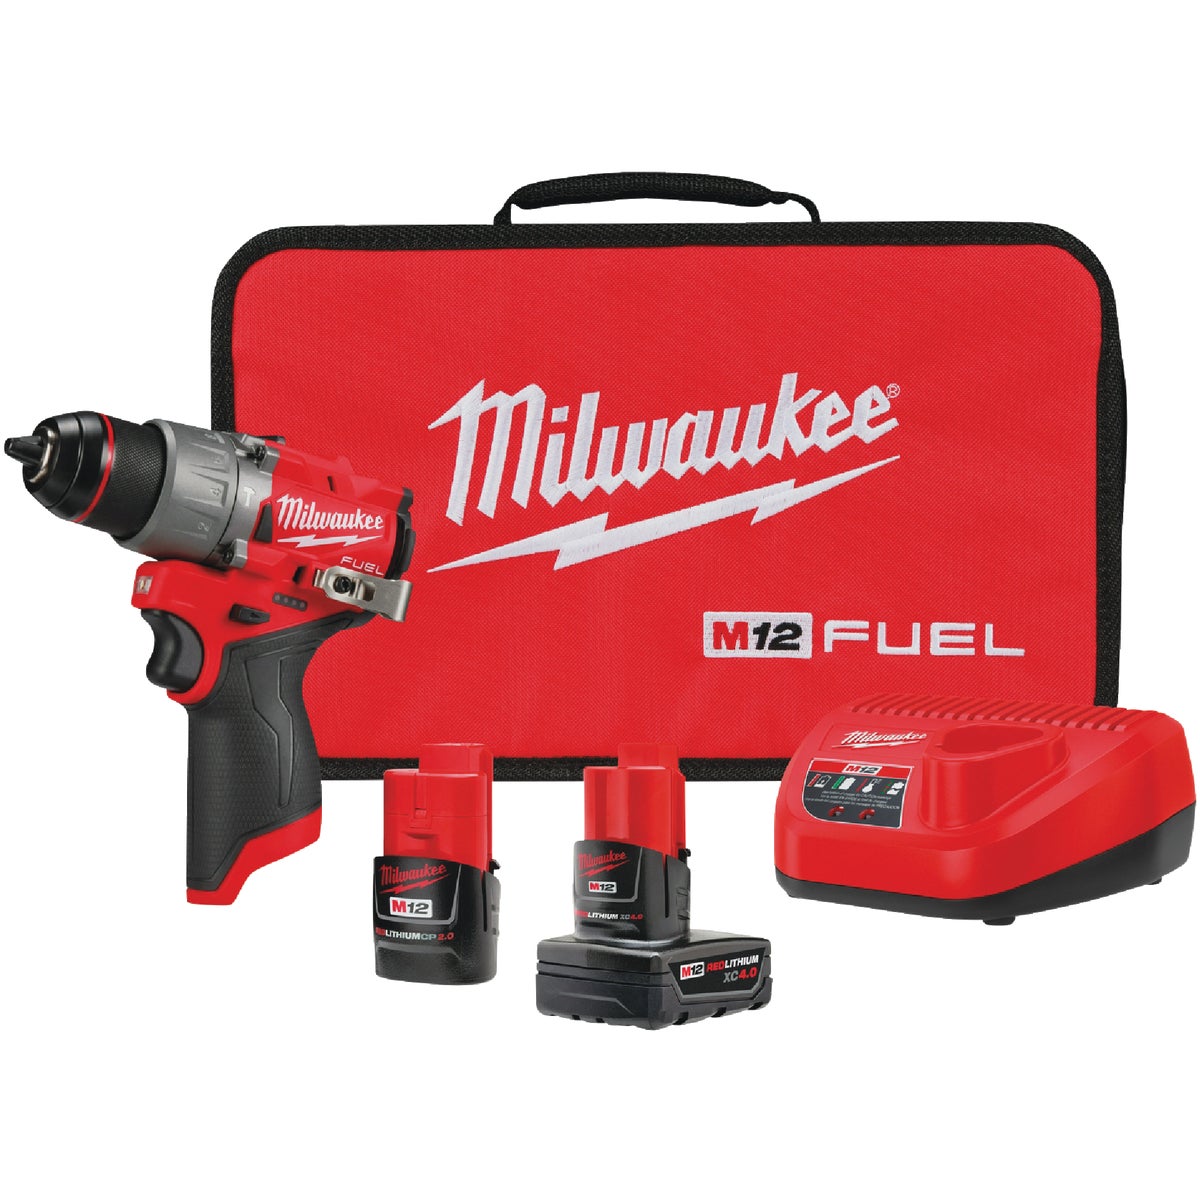 Milwaukee M12 FUEL 12-Volt Lithium-Ion Brushless 1/2 In. Subcompact Cordless Hammer Drill Kit